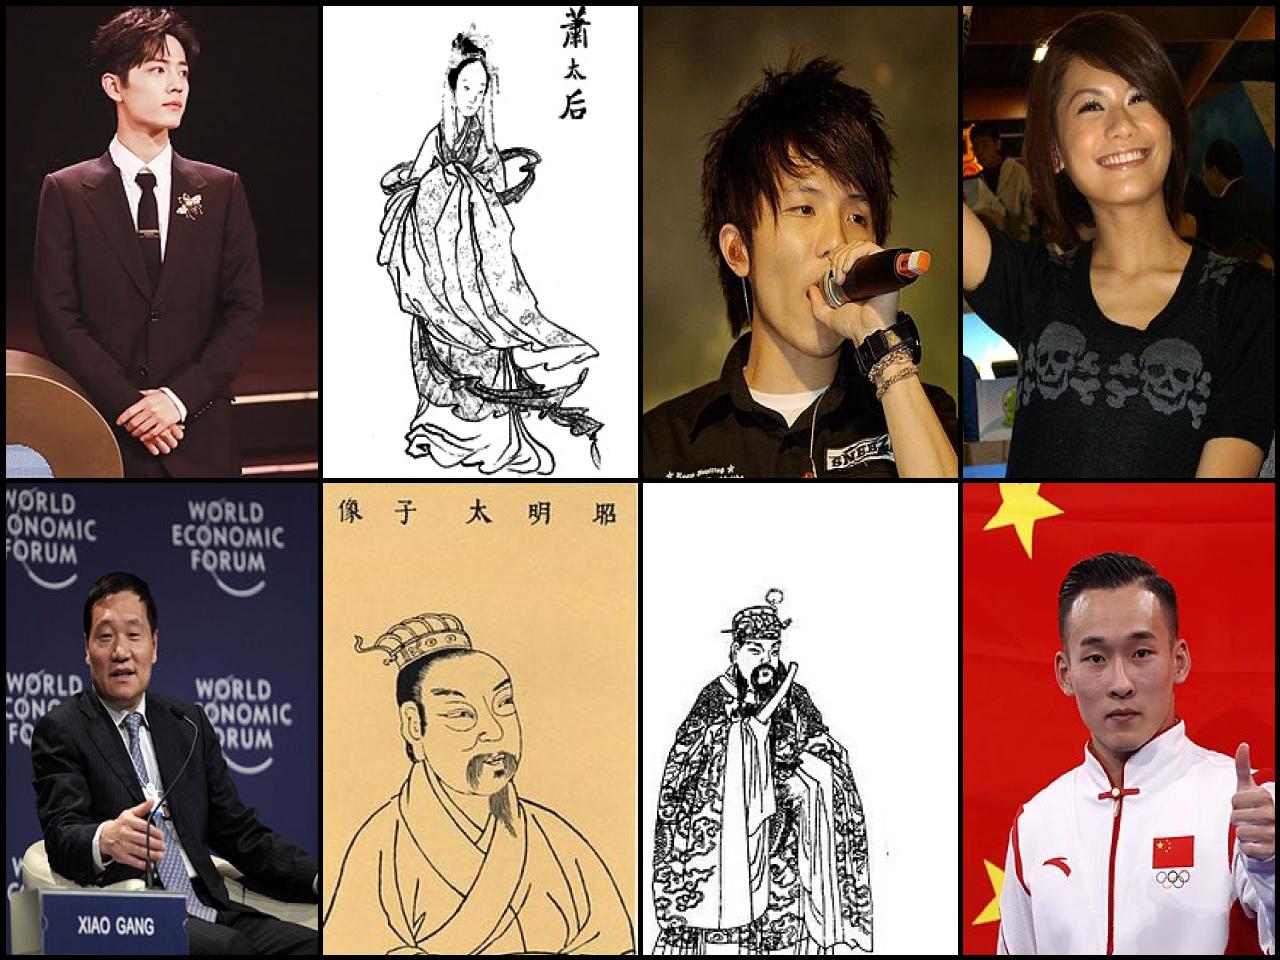 List of Famous people named <b>Xiao</b>